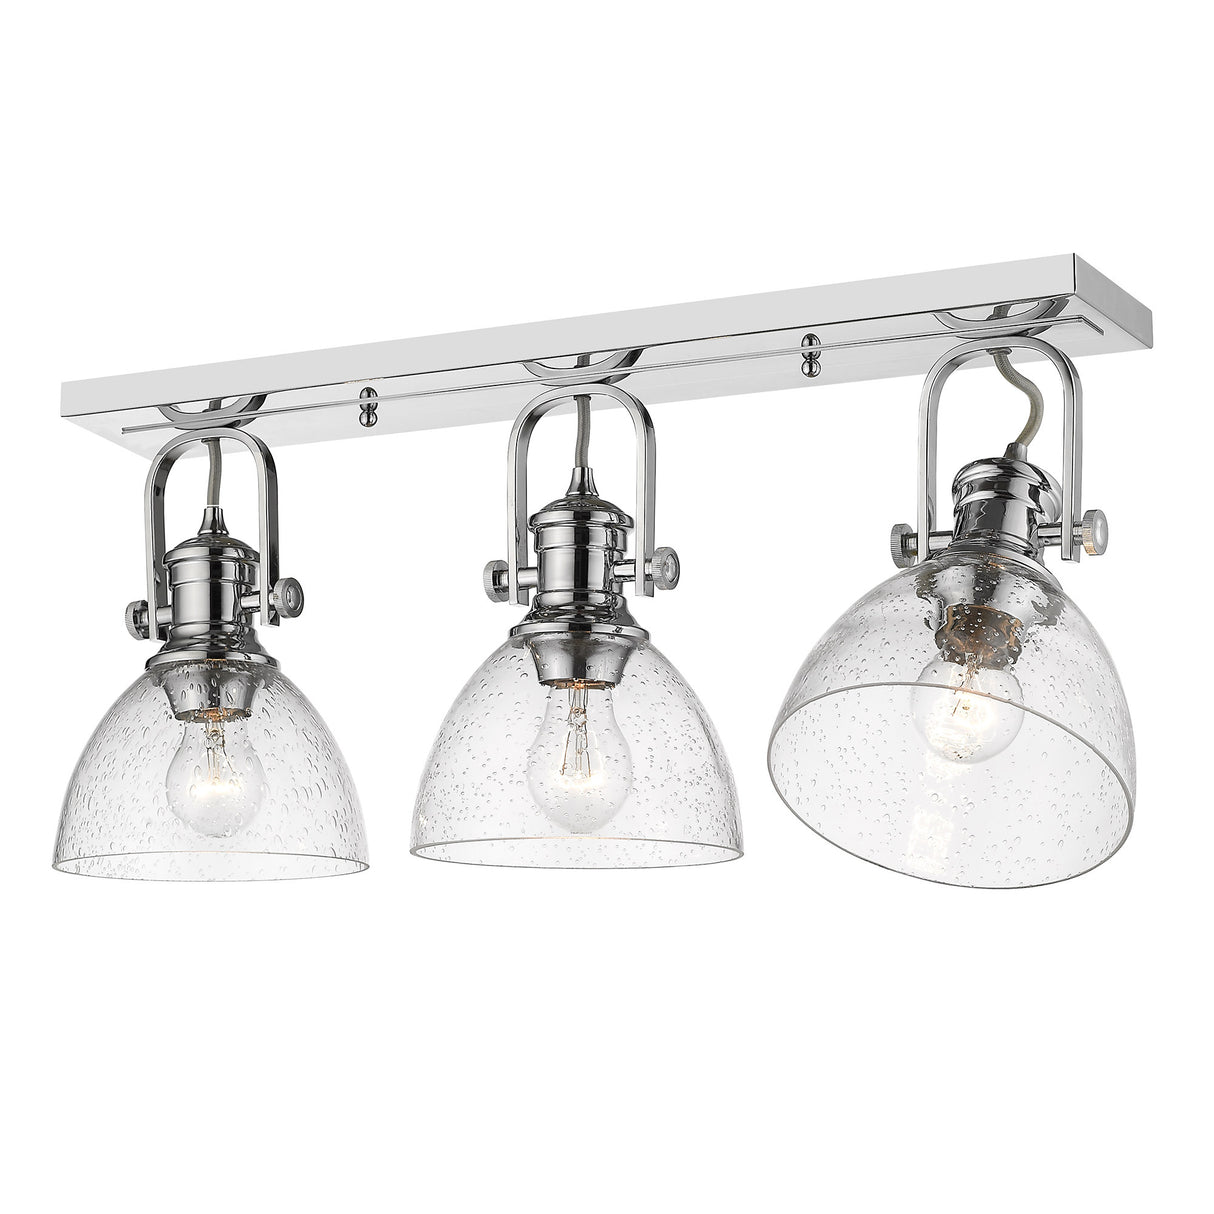 Hines 3-Light Semi-Flush in Chrome with Seeded Glass